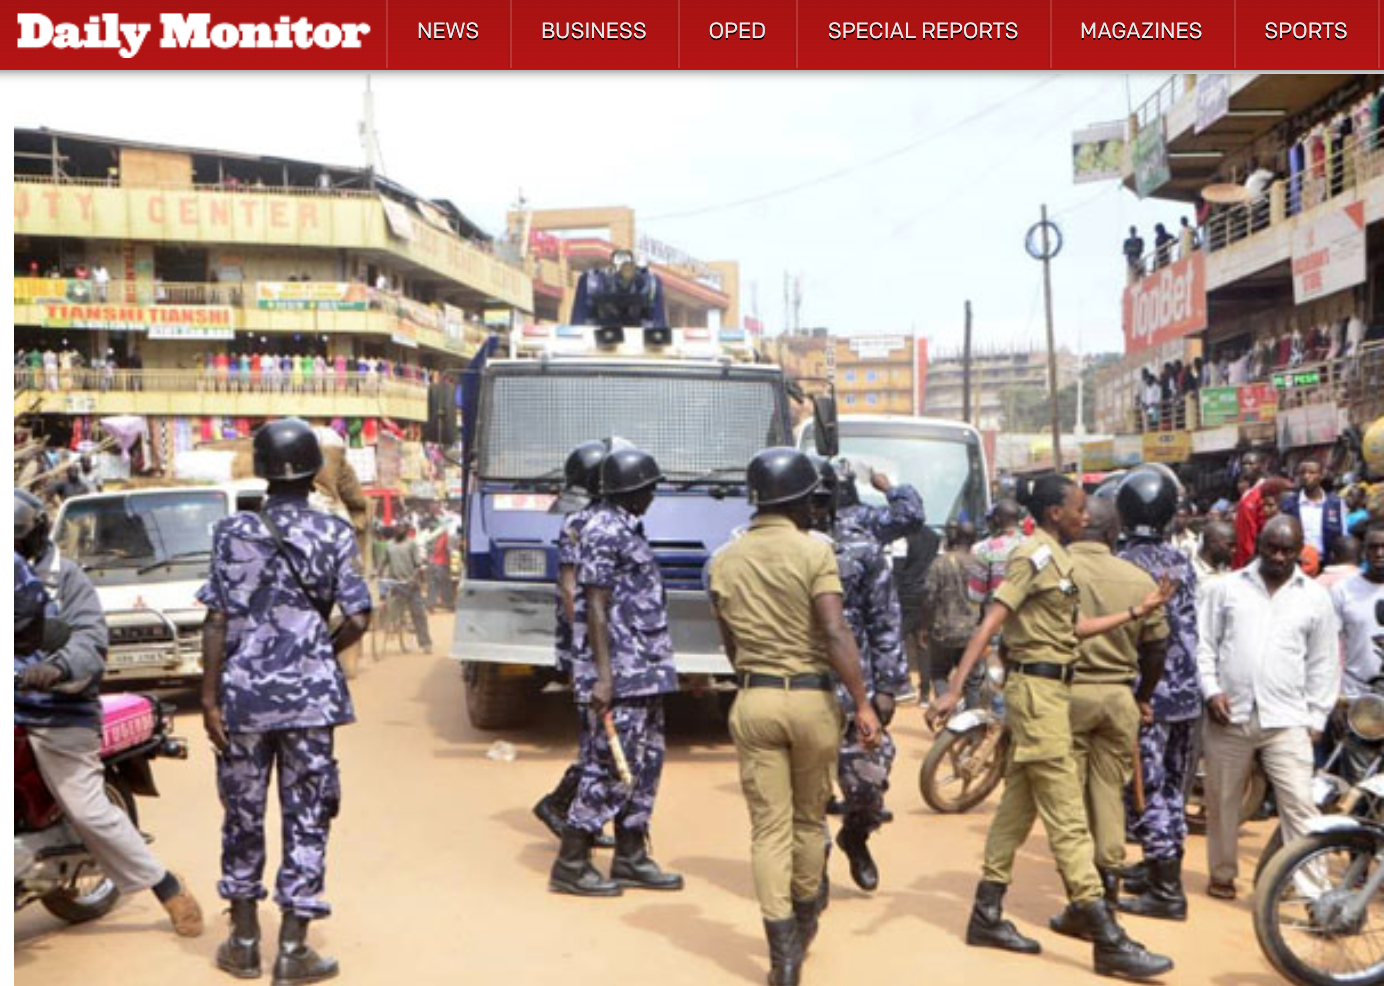 False This Post Claiming To Show Riots In Kampala In 2020 Uses Old Photos From Unrelated Events By Pesacheck Pesacheck